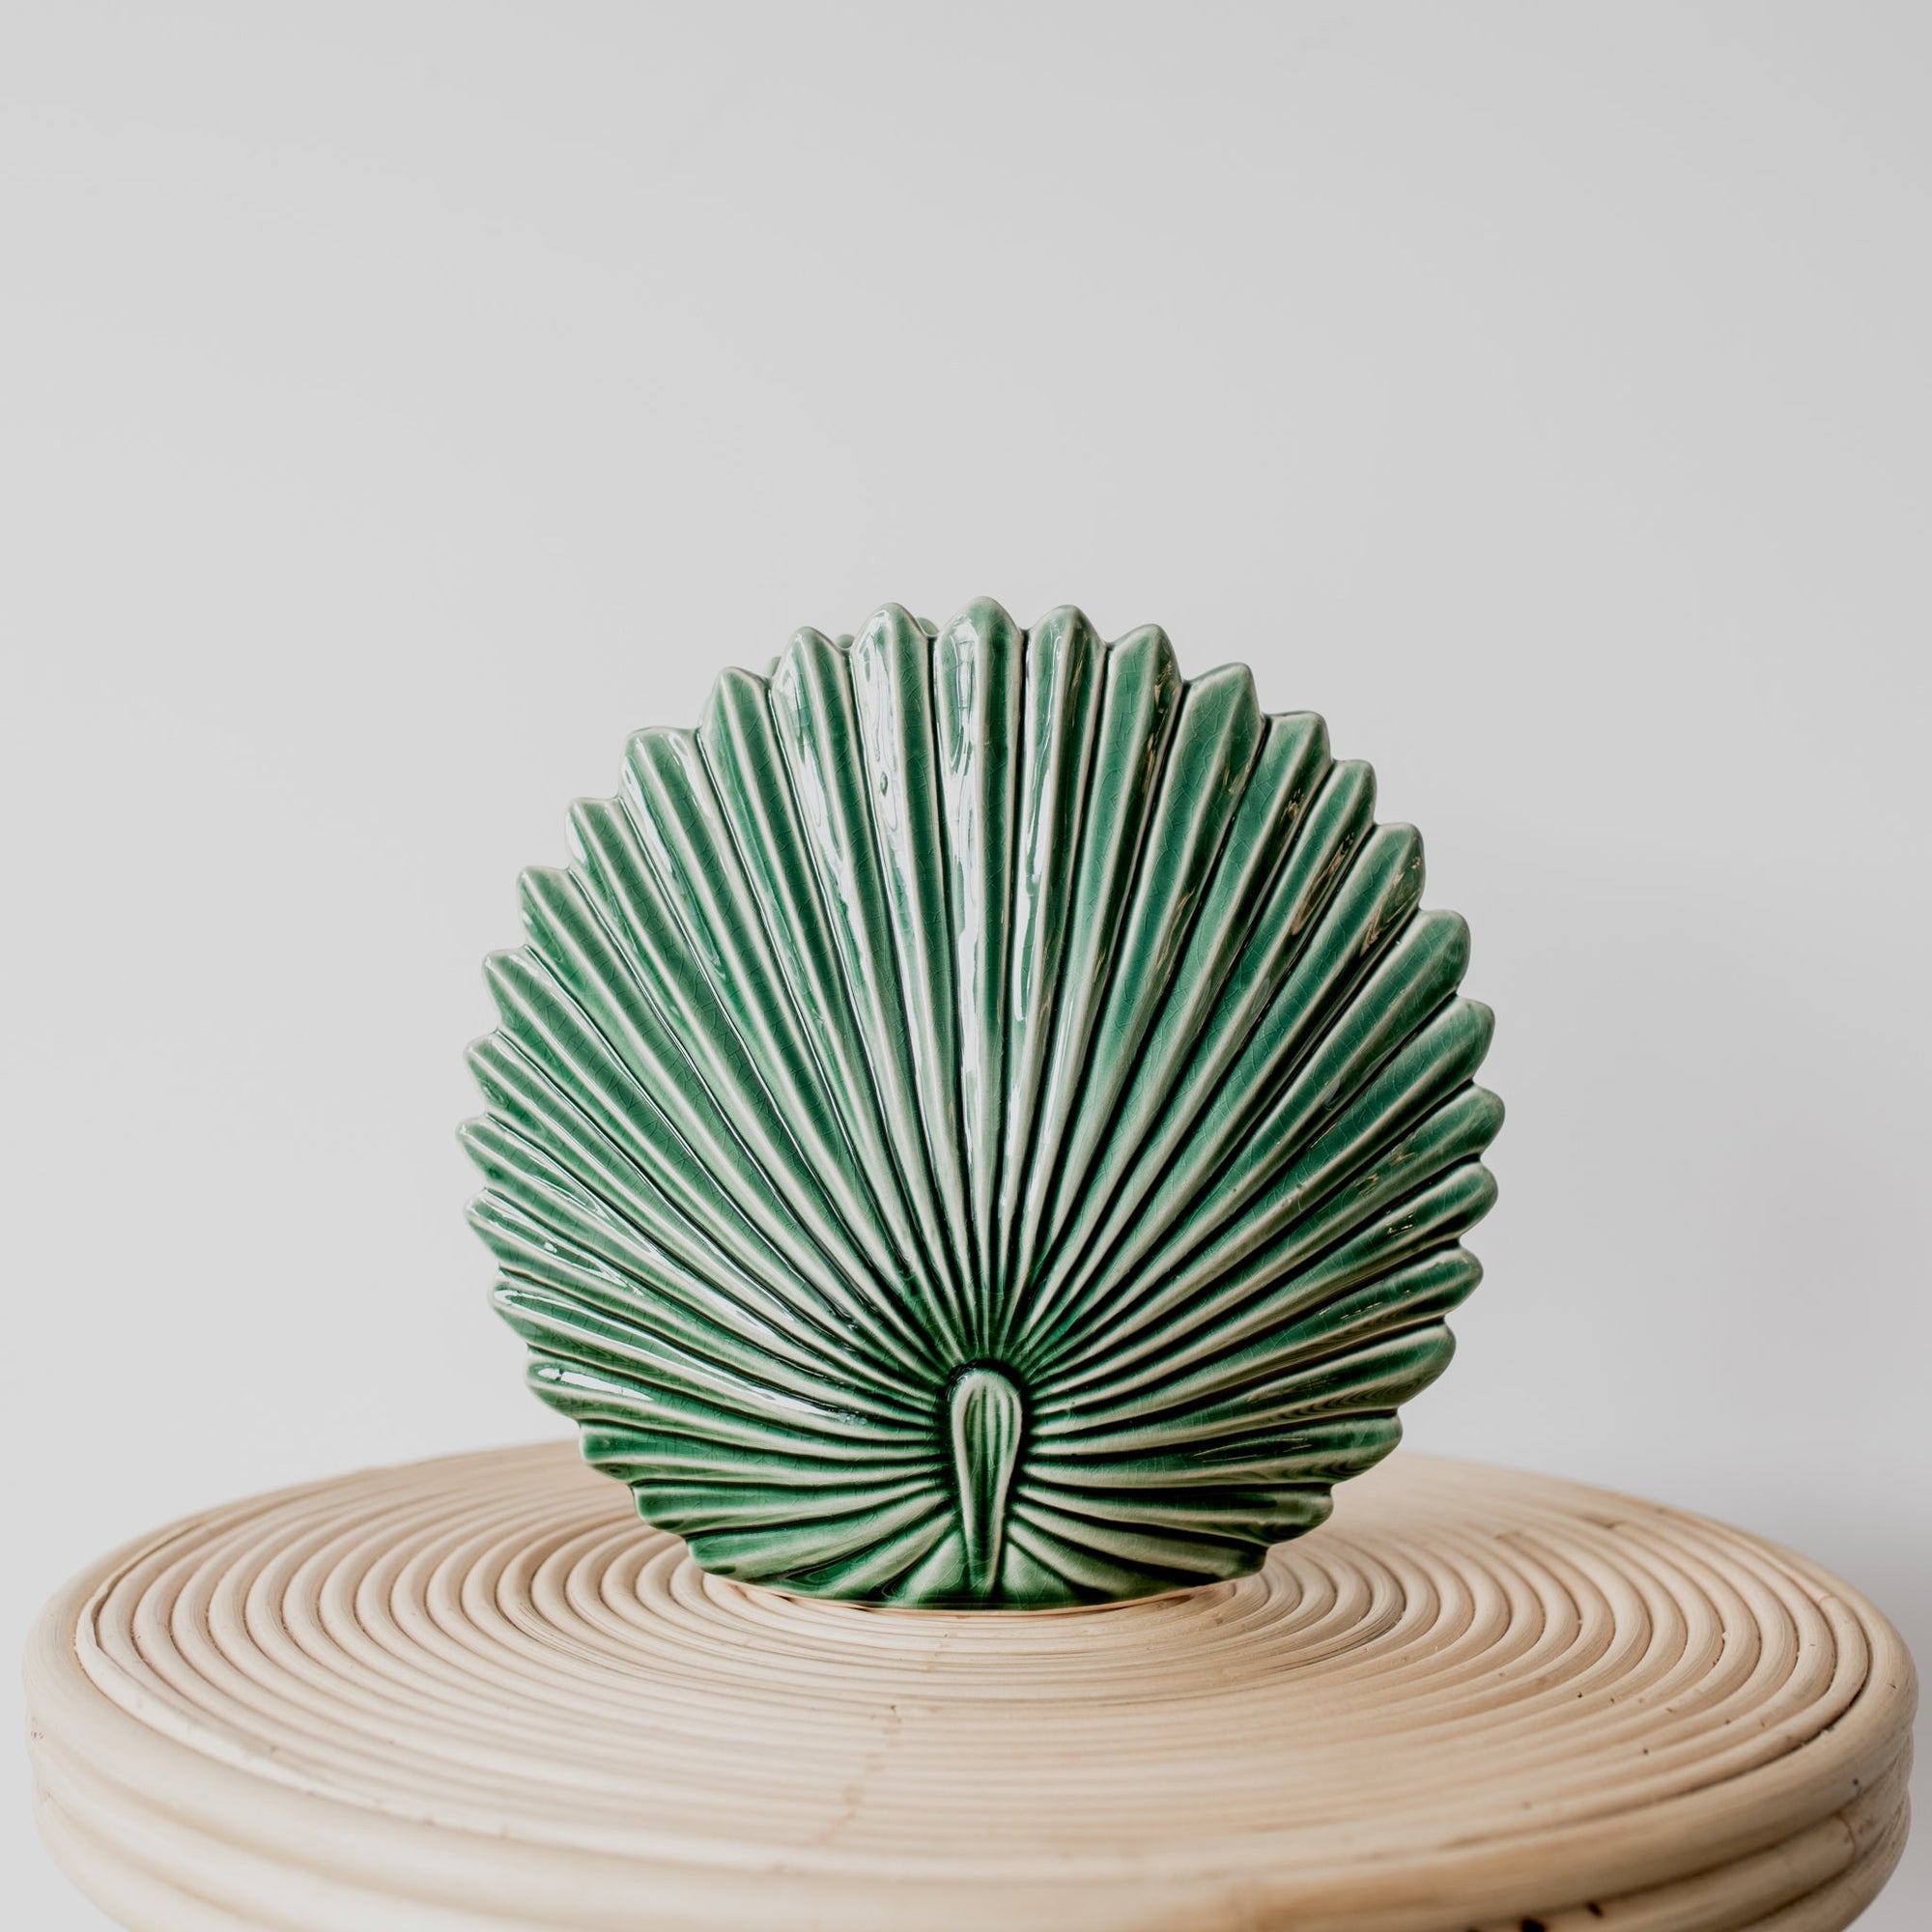 ceramic green art deco peacock vase from corcovado furniture and homewares new zealand